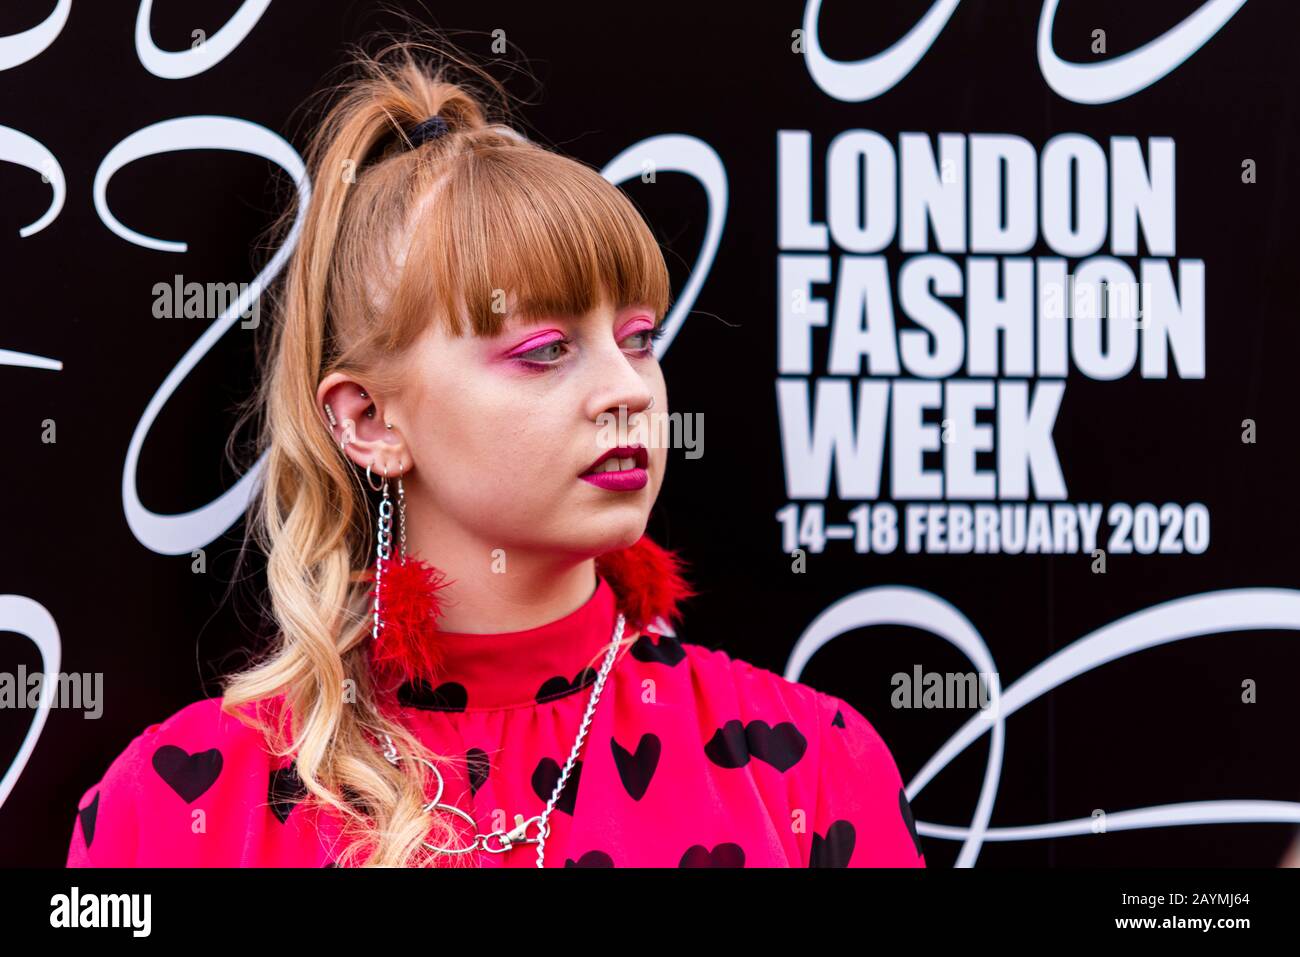 A fashionista female posing in the Strand outside The Store during London Fashion Week 2020. Brand. Logo. Pink eye shadow. Dates Stock Photo